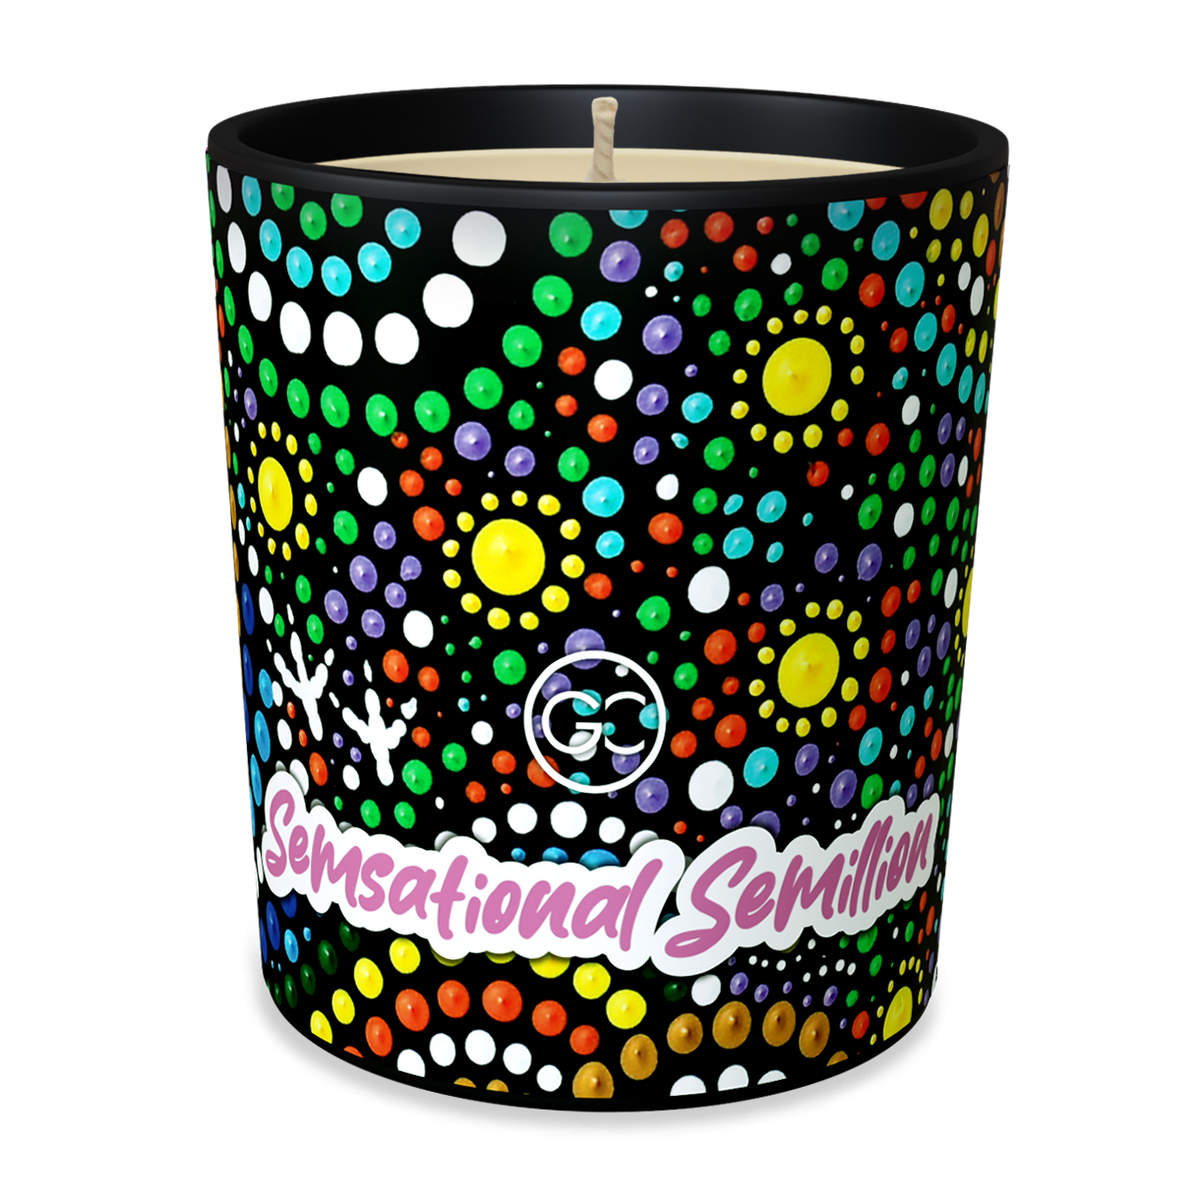 Semsational Semillion - Zesty Orange and Peach Scented Soy Paraffin Candle 40hr Burn